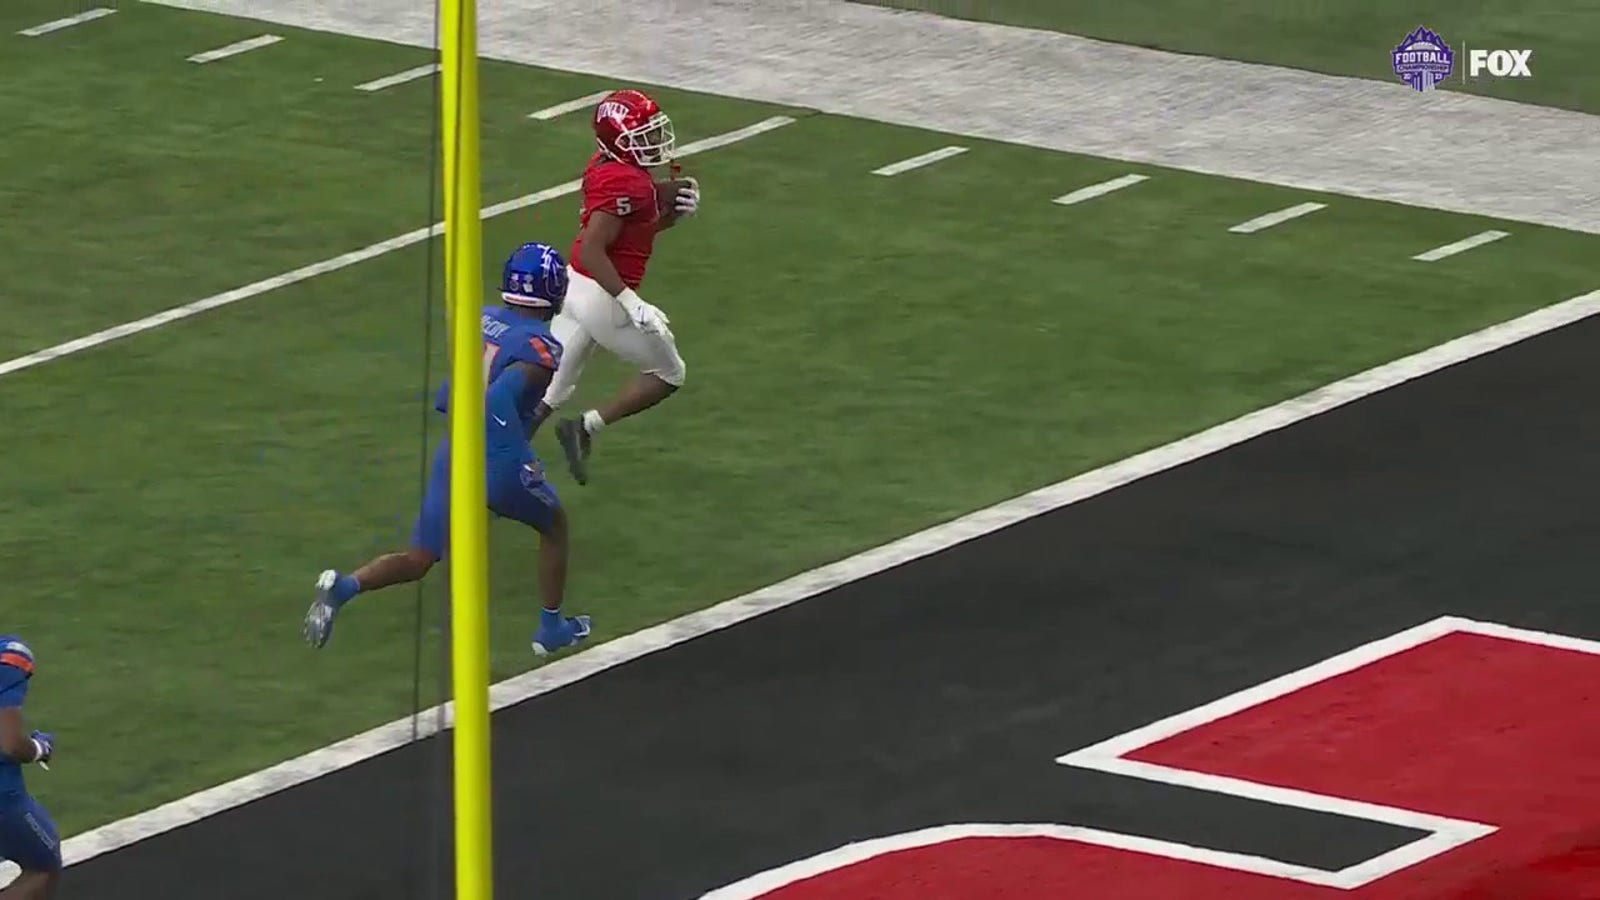 UNLV's Vincent Davis Jr. rushes for 5-yard TD to tie the game vs. Boise State